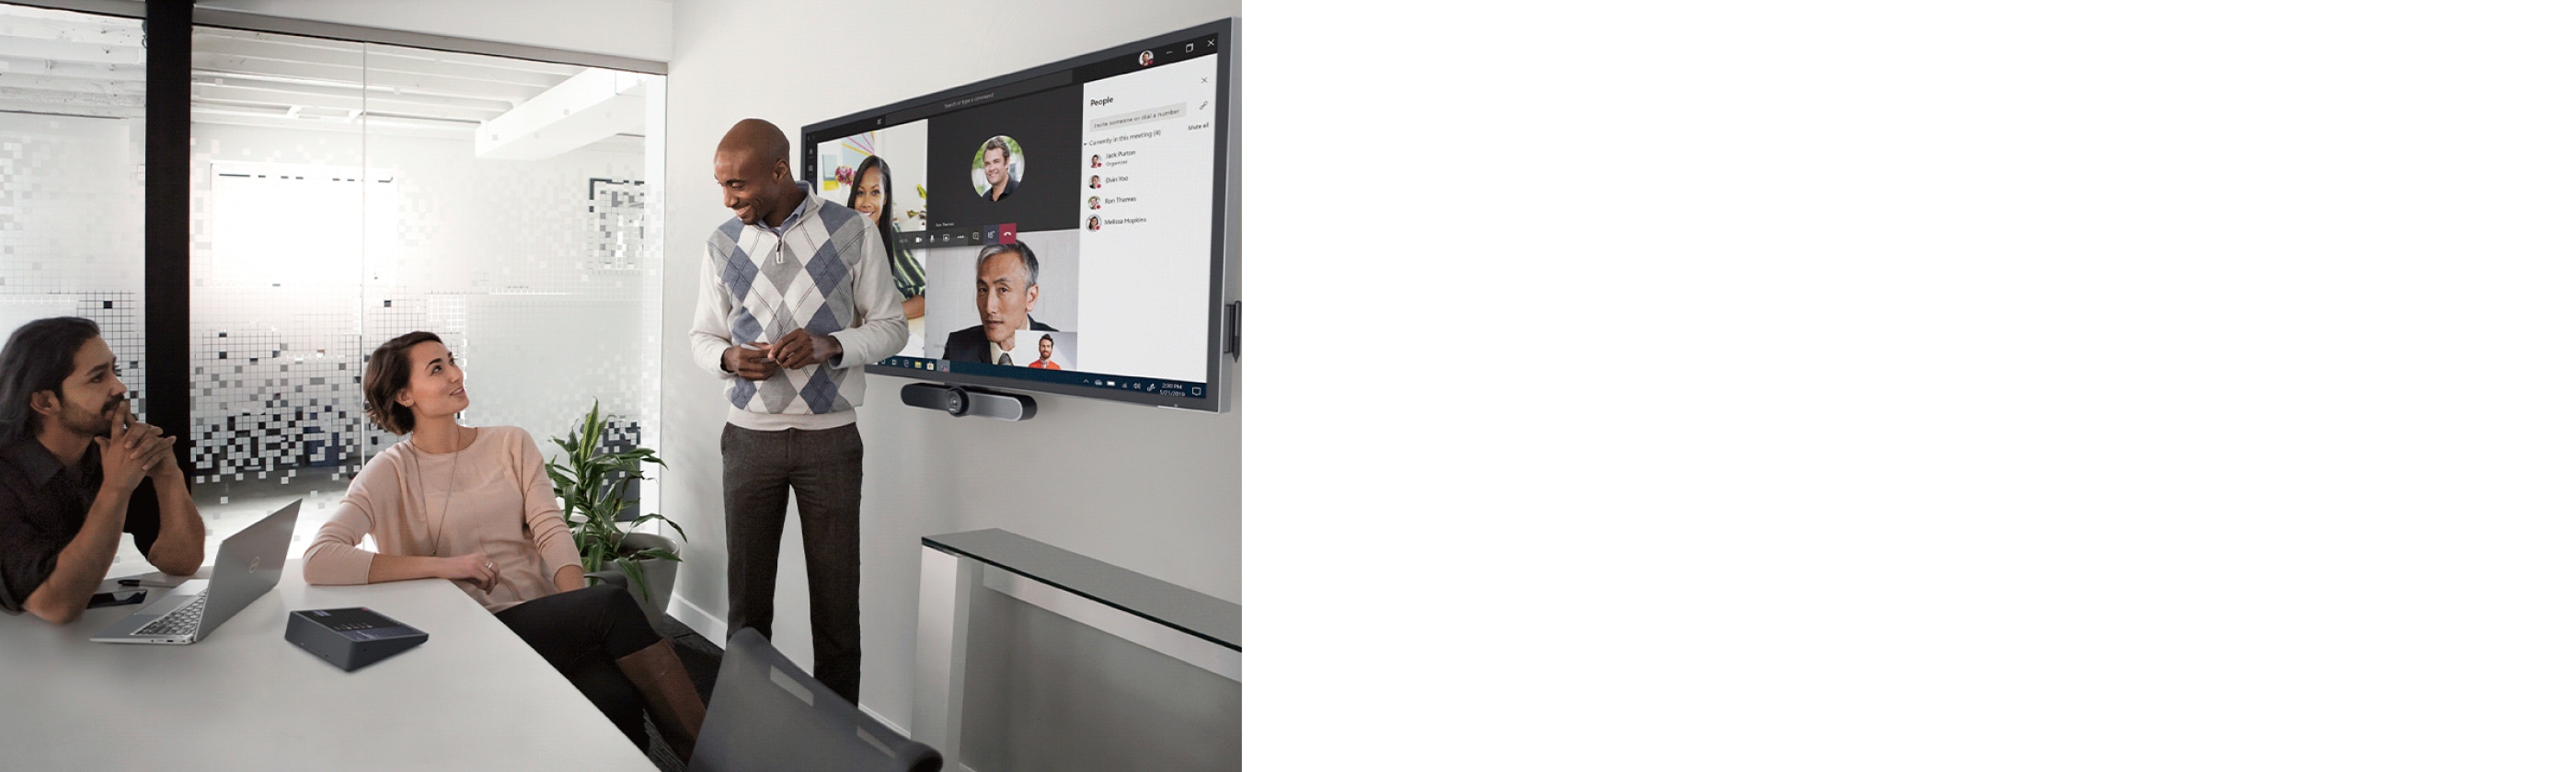 Dell Optiplex + Logitech Meeting Space Solutions